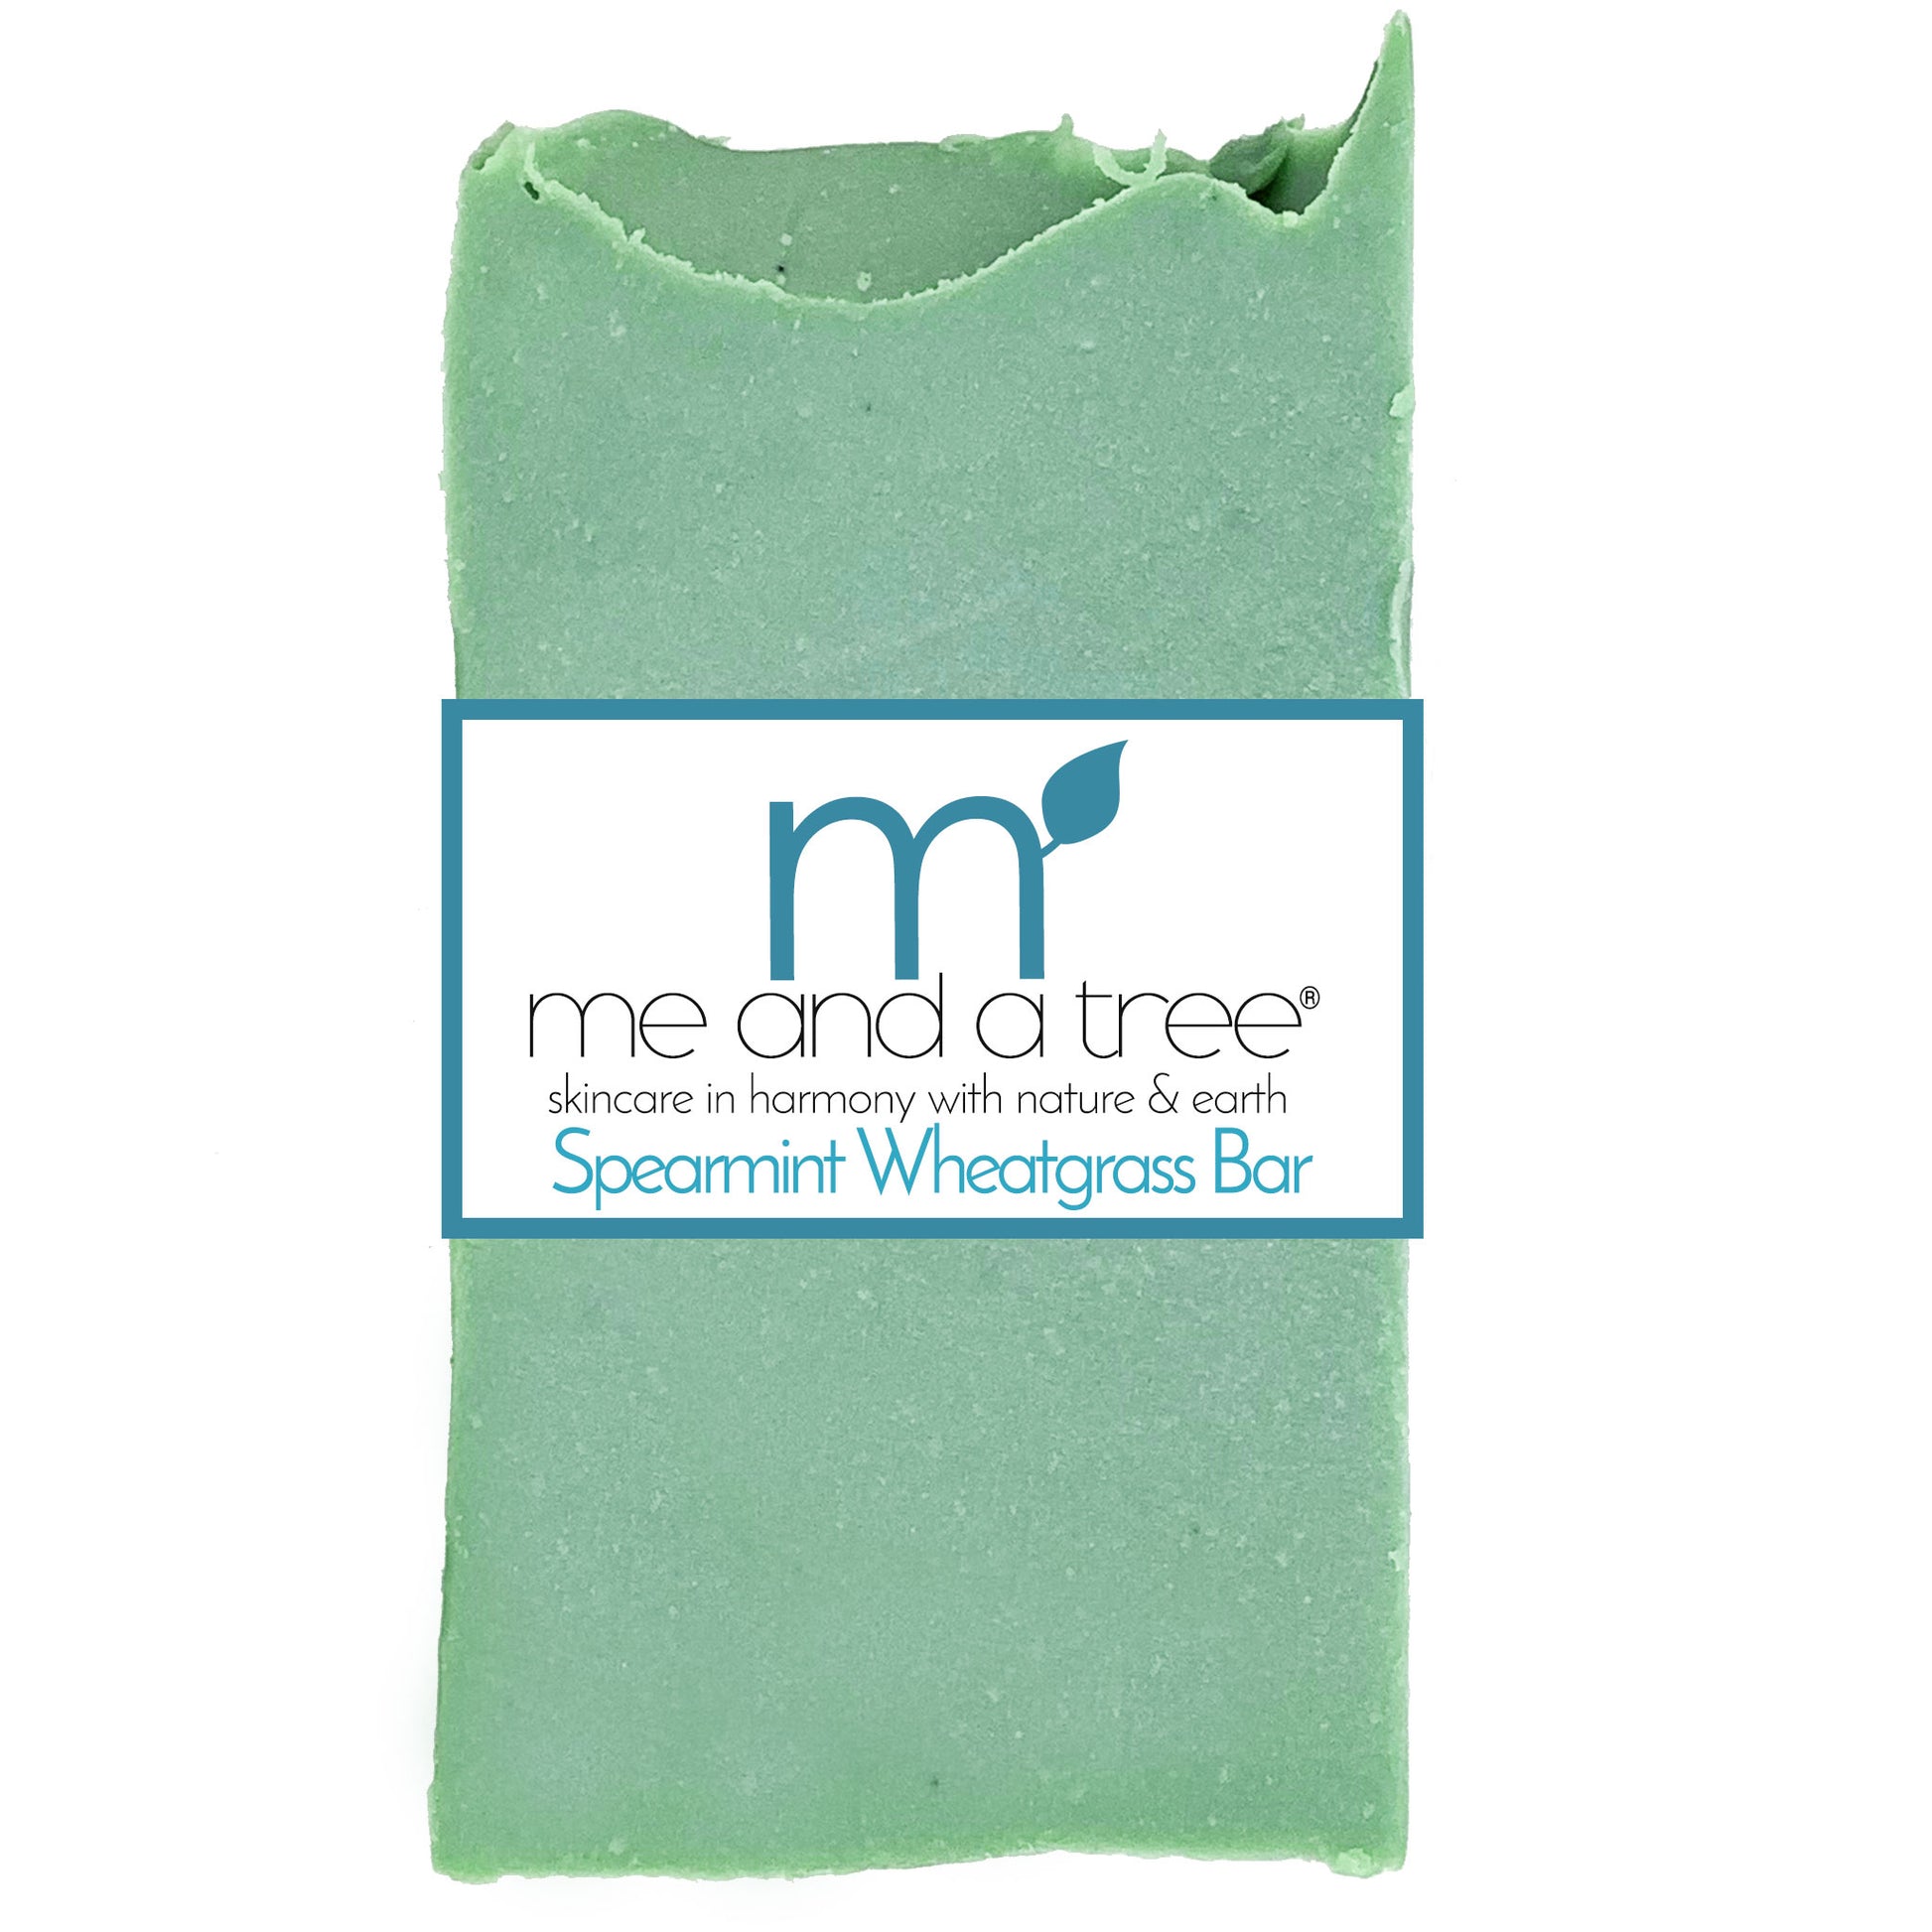 Best Spearmint Wheatgrass Soap artisan handcrafted soap made with spearmint, wheatgrass, shea butter, and olive oil that offers a skin-balancing and stimulating cleanse for all ages and skin types.